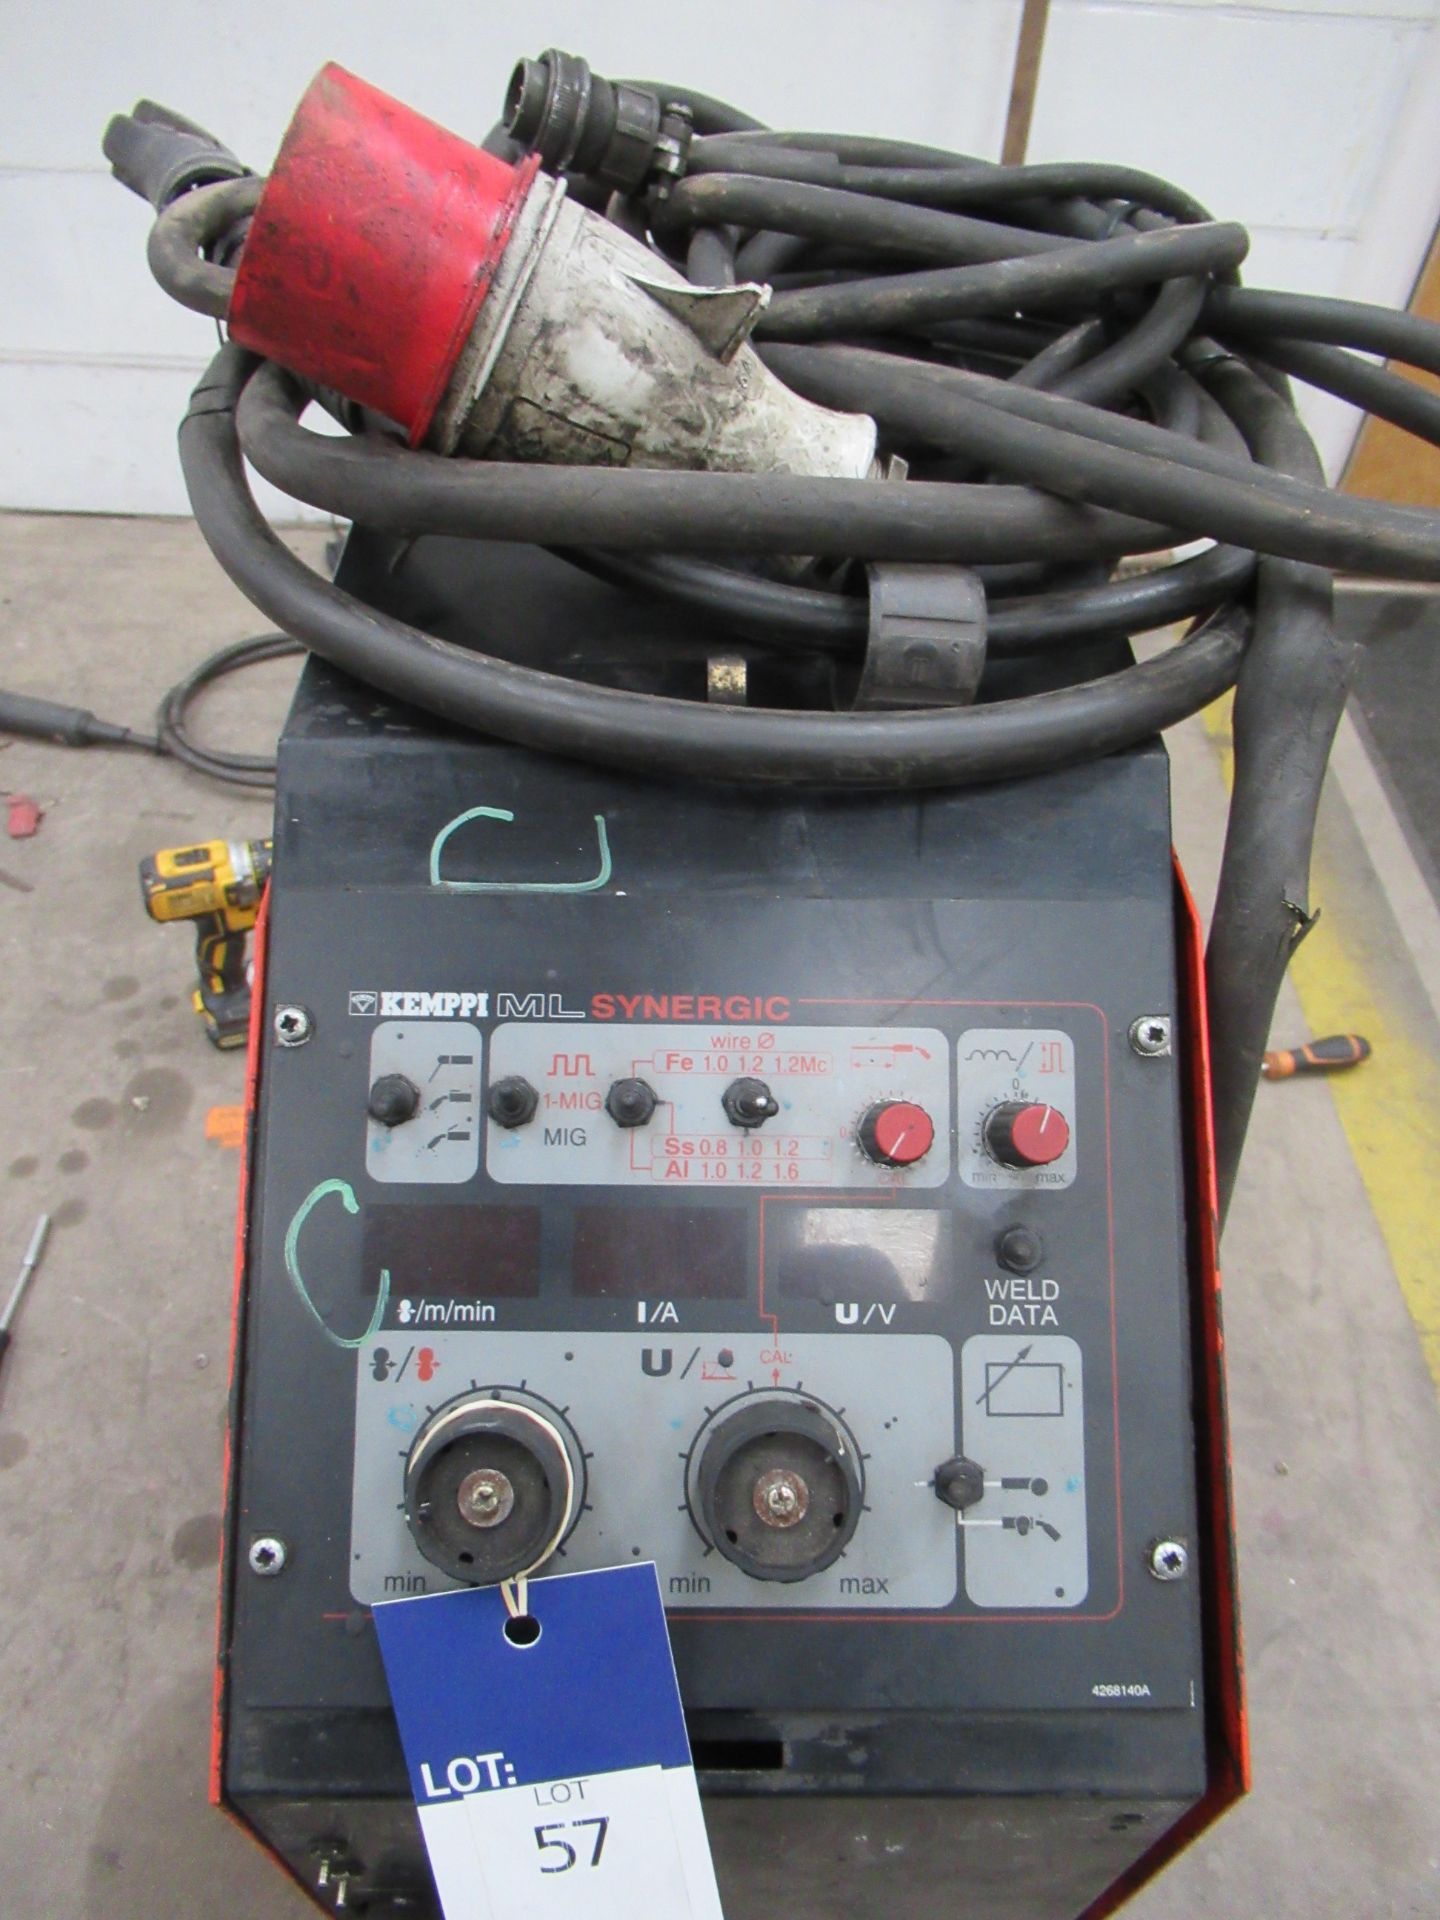 Kemppi ML synergic Promig 520R welder with Kemppi Pro 3000 power source with torch - Image 2 of 9